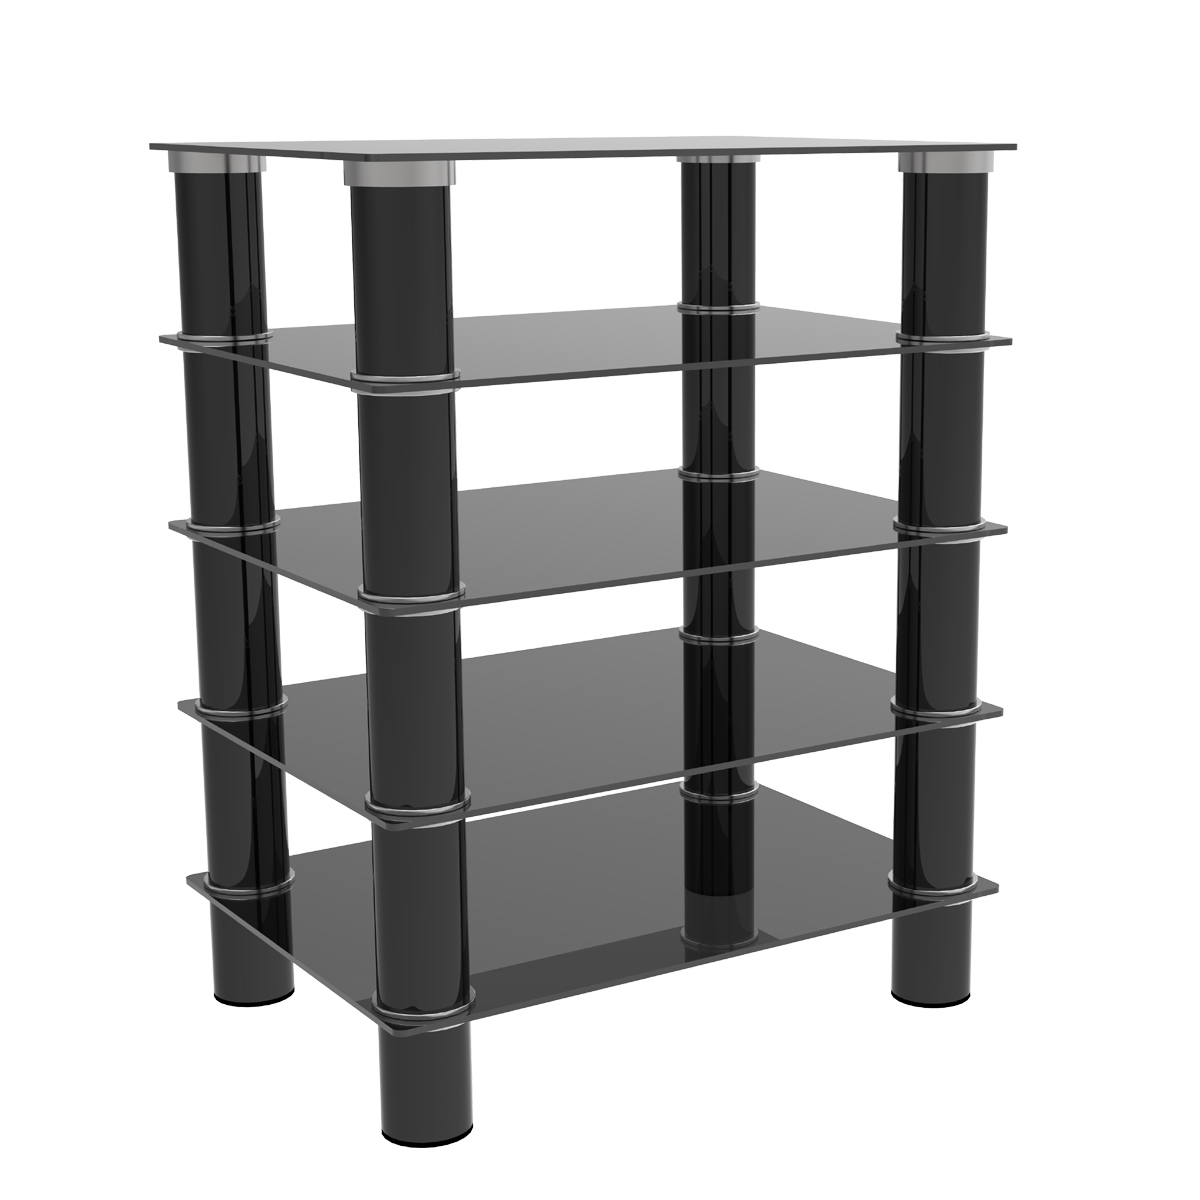 Ryan Rove Hamlin Clear Glass Component Stand - Entertainment Center, Home Theater System, Media Storage, Stereo and Audio Consol